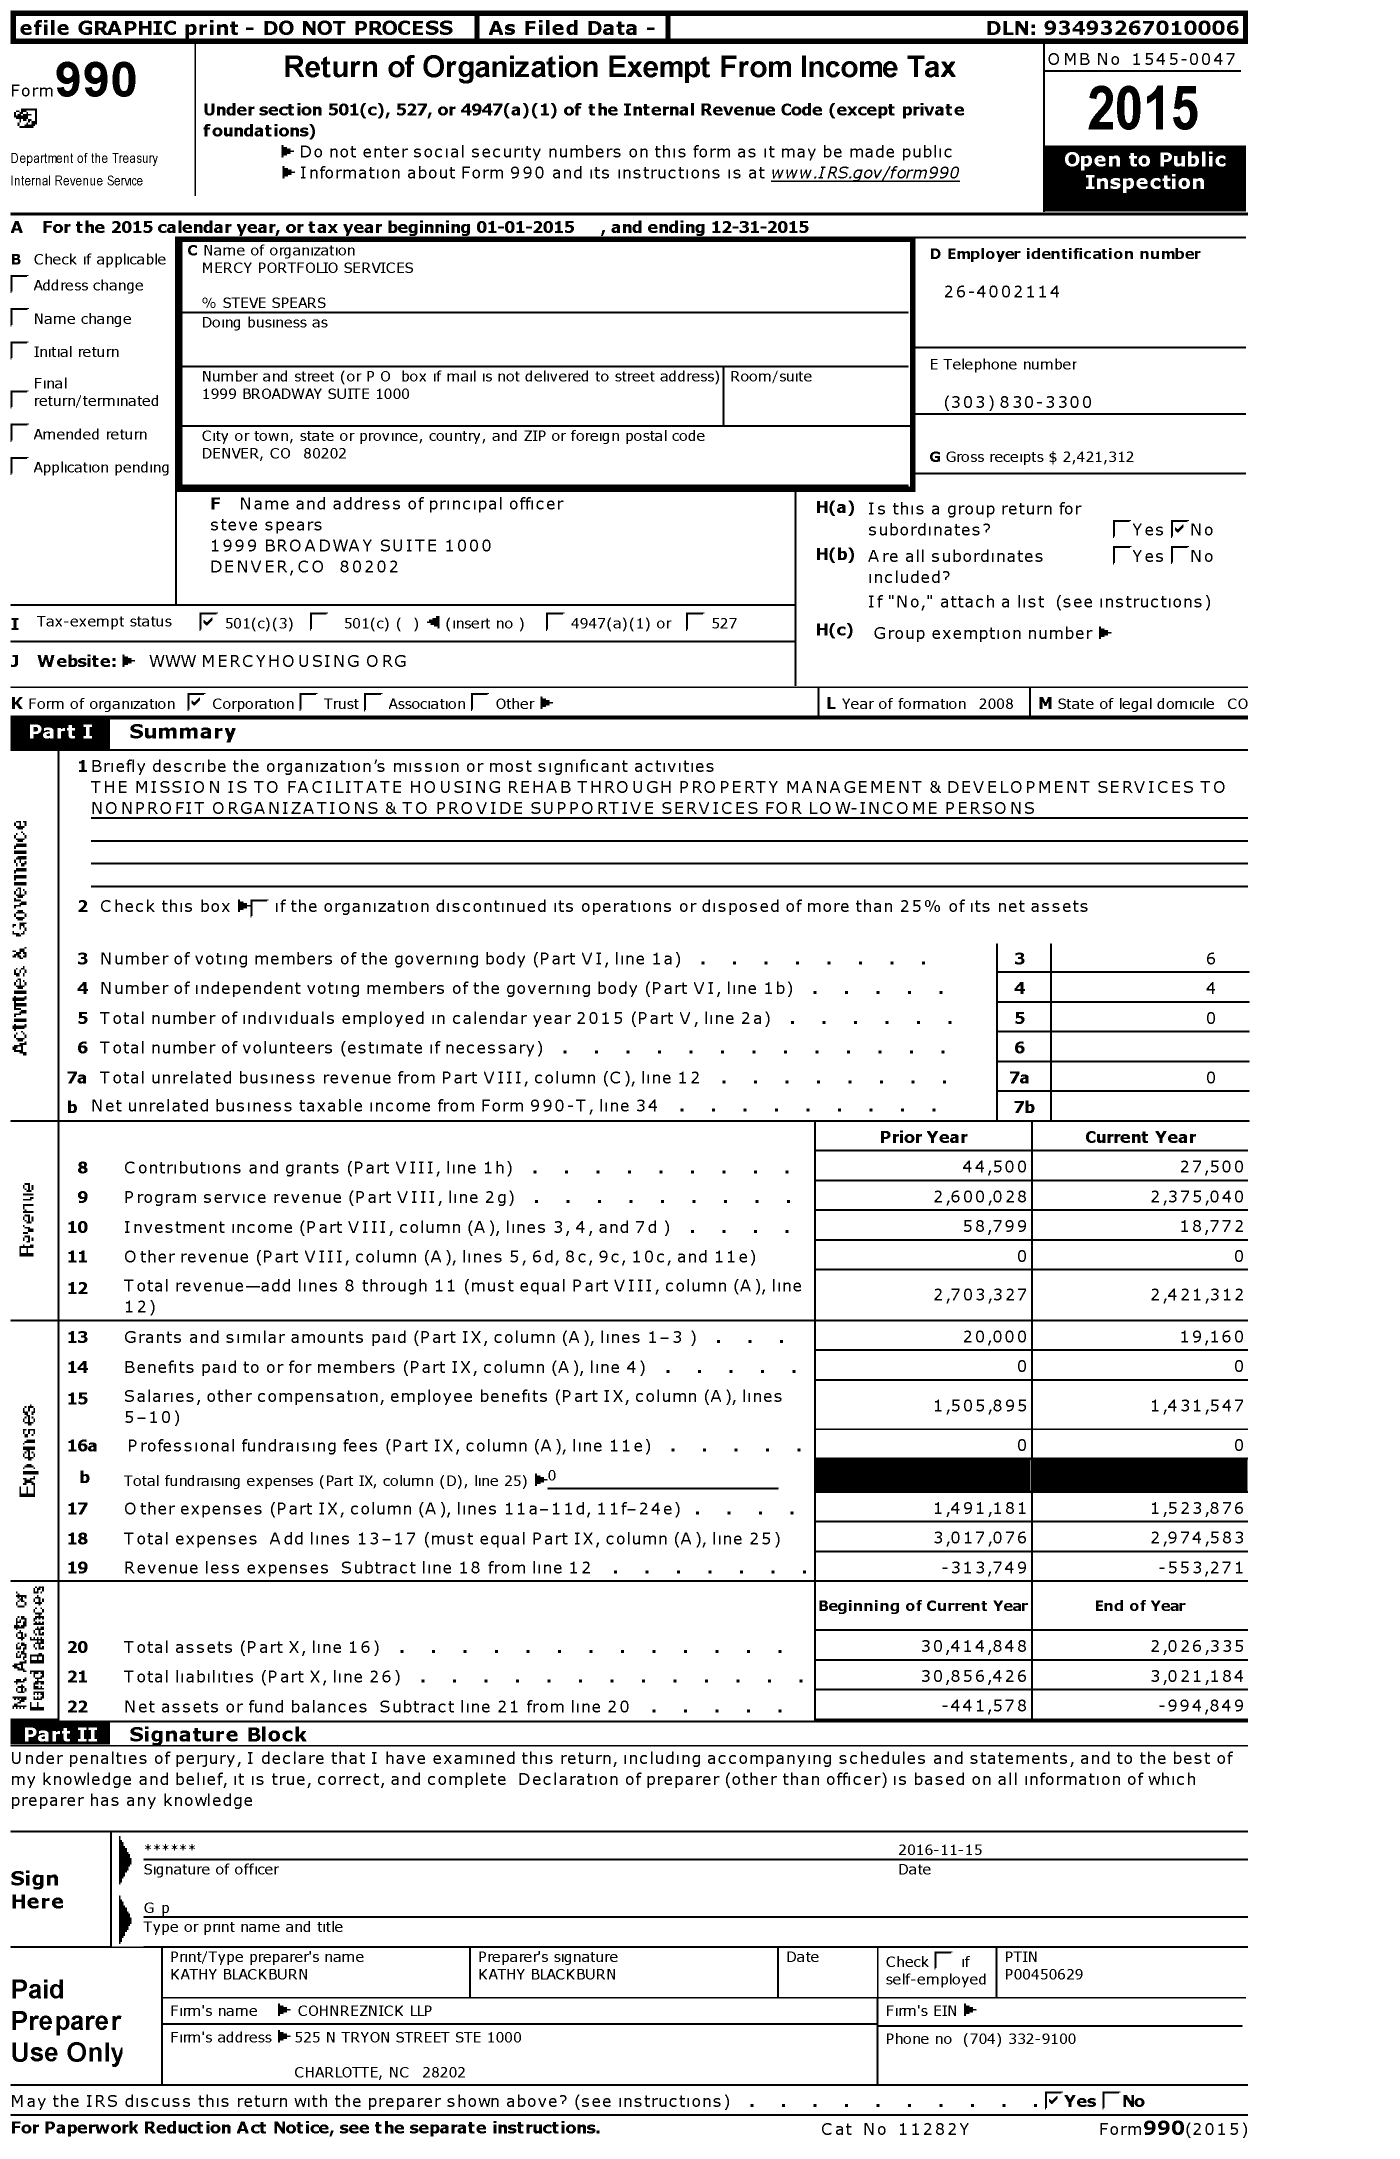 Image of first page of 2015 Form 990 for Mercy Portfolio Services